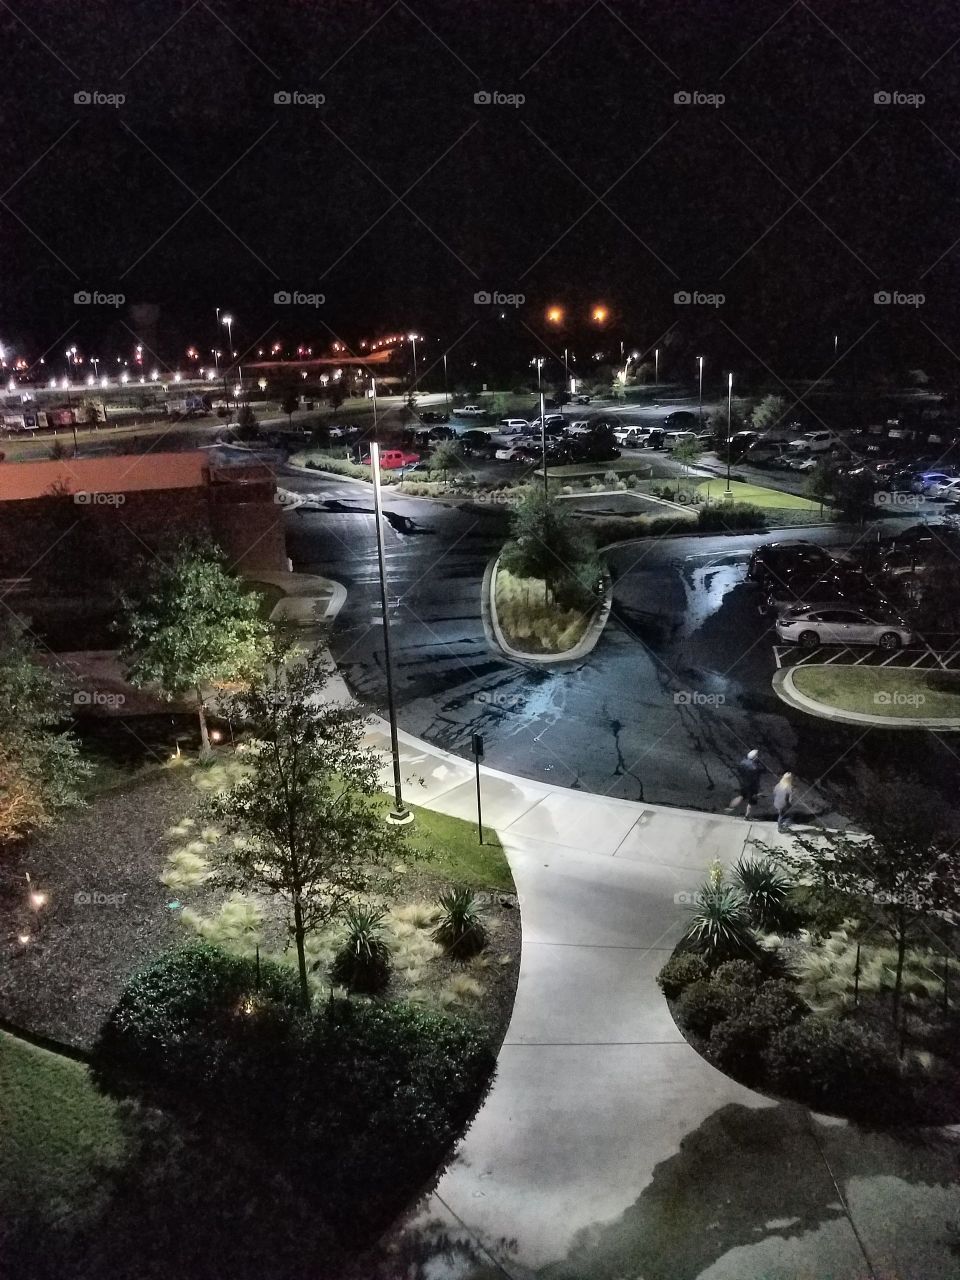 Looking out the window  at Winstar